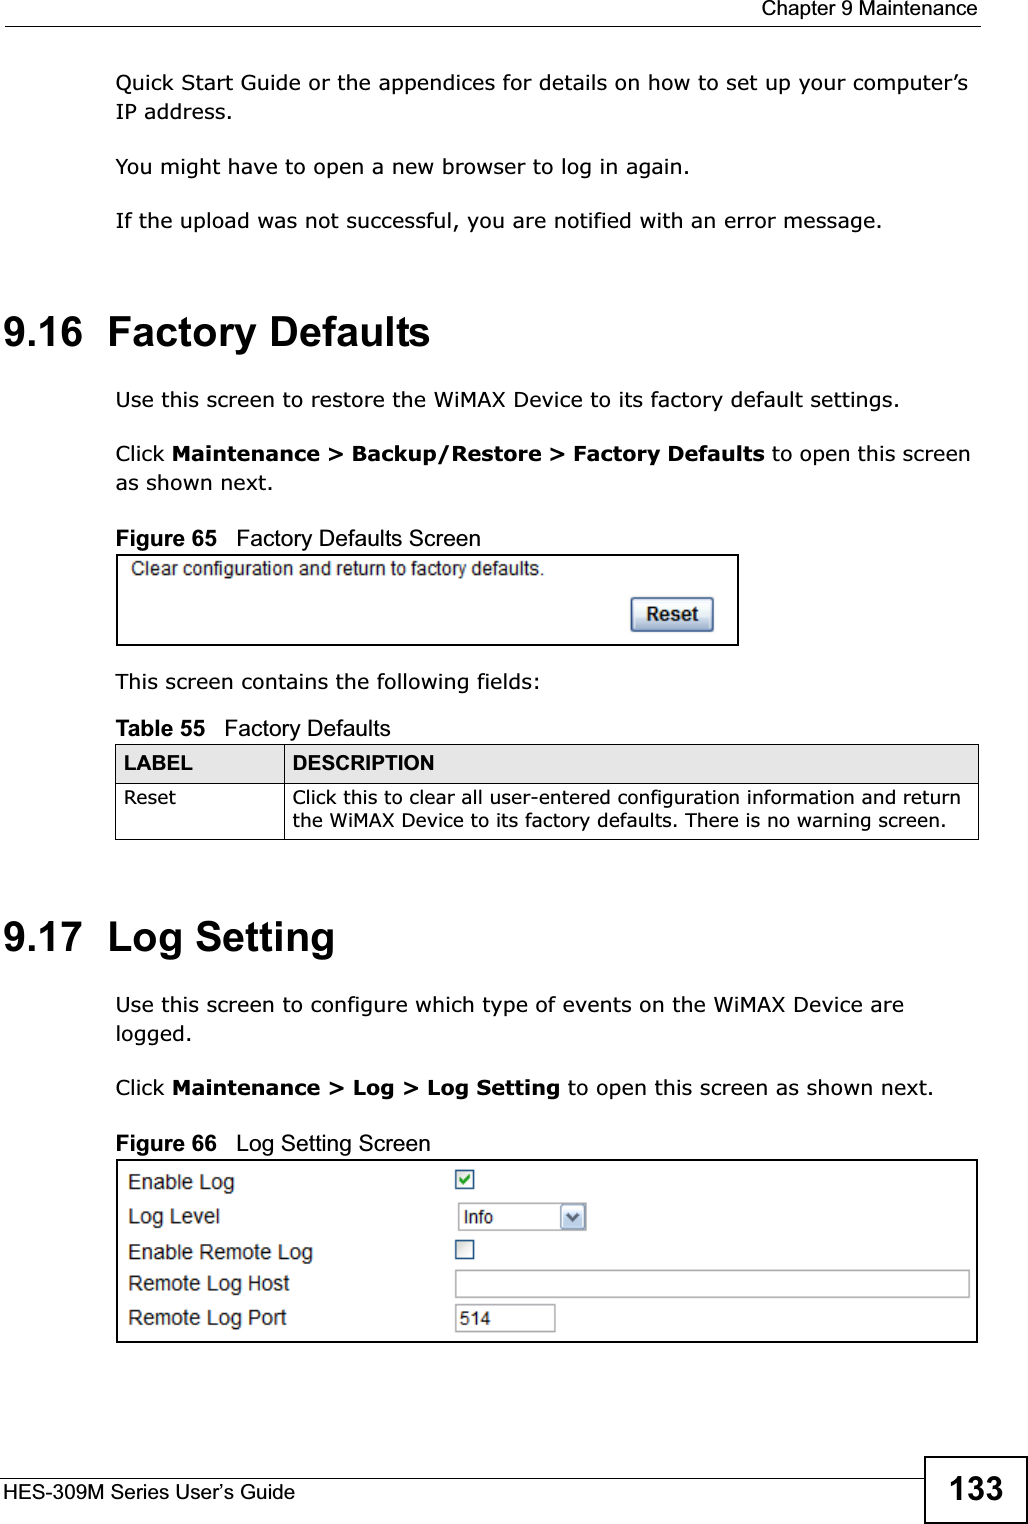  Chapter 9 MaintenanceHES-309M Series User’s Guide 133Quick Start Guide or the appendices for details on how to set up your computer’s IP address.You might have to open a new browser to log in again.If the upload was not successful, you are notified with an error message.9.16  Factory DefaultsUse this screen to restore the WiMAX Device to its factory default settings.Click Maintenance &gt; Backup/Restore &gt; Factory Defaults to open this screen as shown next.Figure 65   Factory Defaults ScreenThis screen contains the following fields:9.17  Log SettingUse this screen to configure which type of events on the WiMAX Device are logged.Click Maintenance &gt; Log &gt; Log Setting to open this screen as shown next.Figure 66   Log Setting ScreenTable 55   Factory DefaultsLABEL DESCRIPTIONReset Click this to clear all user-entered configuration information and return the WiMAX Device to its factory defaults. There is no warning screen.